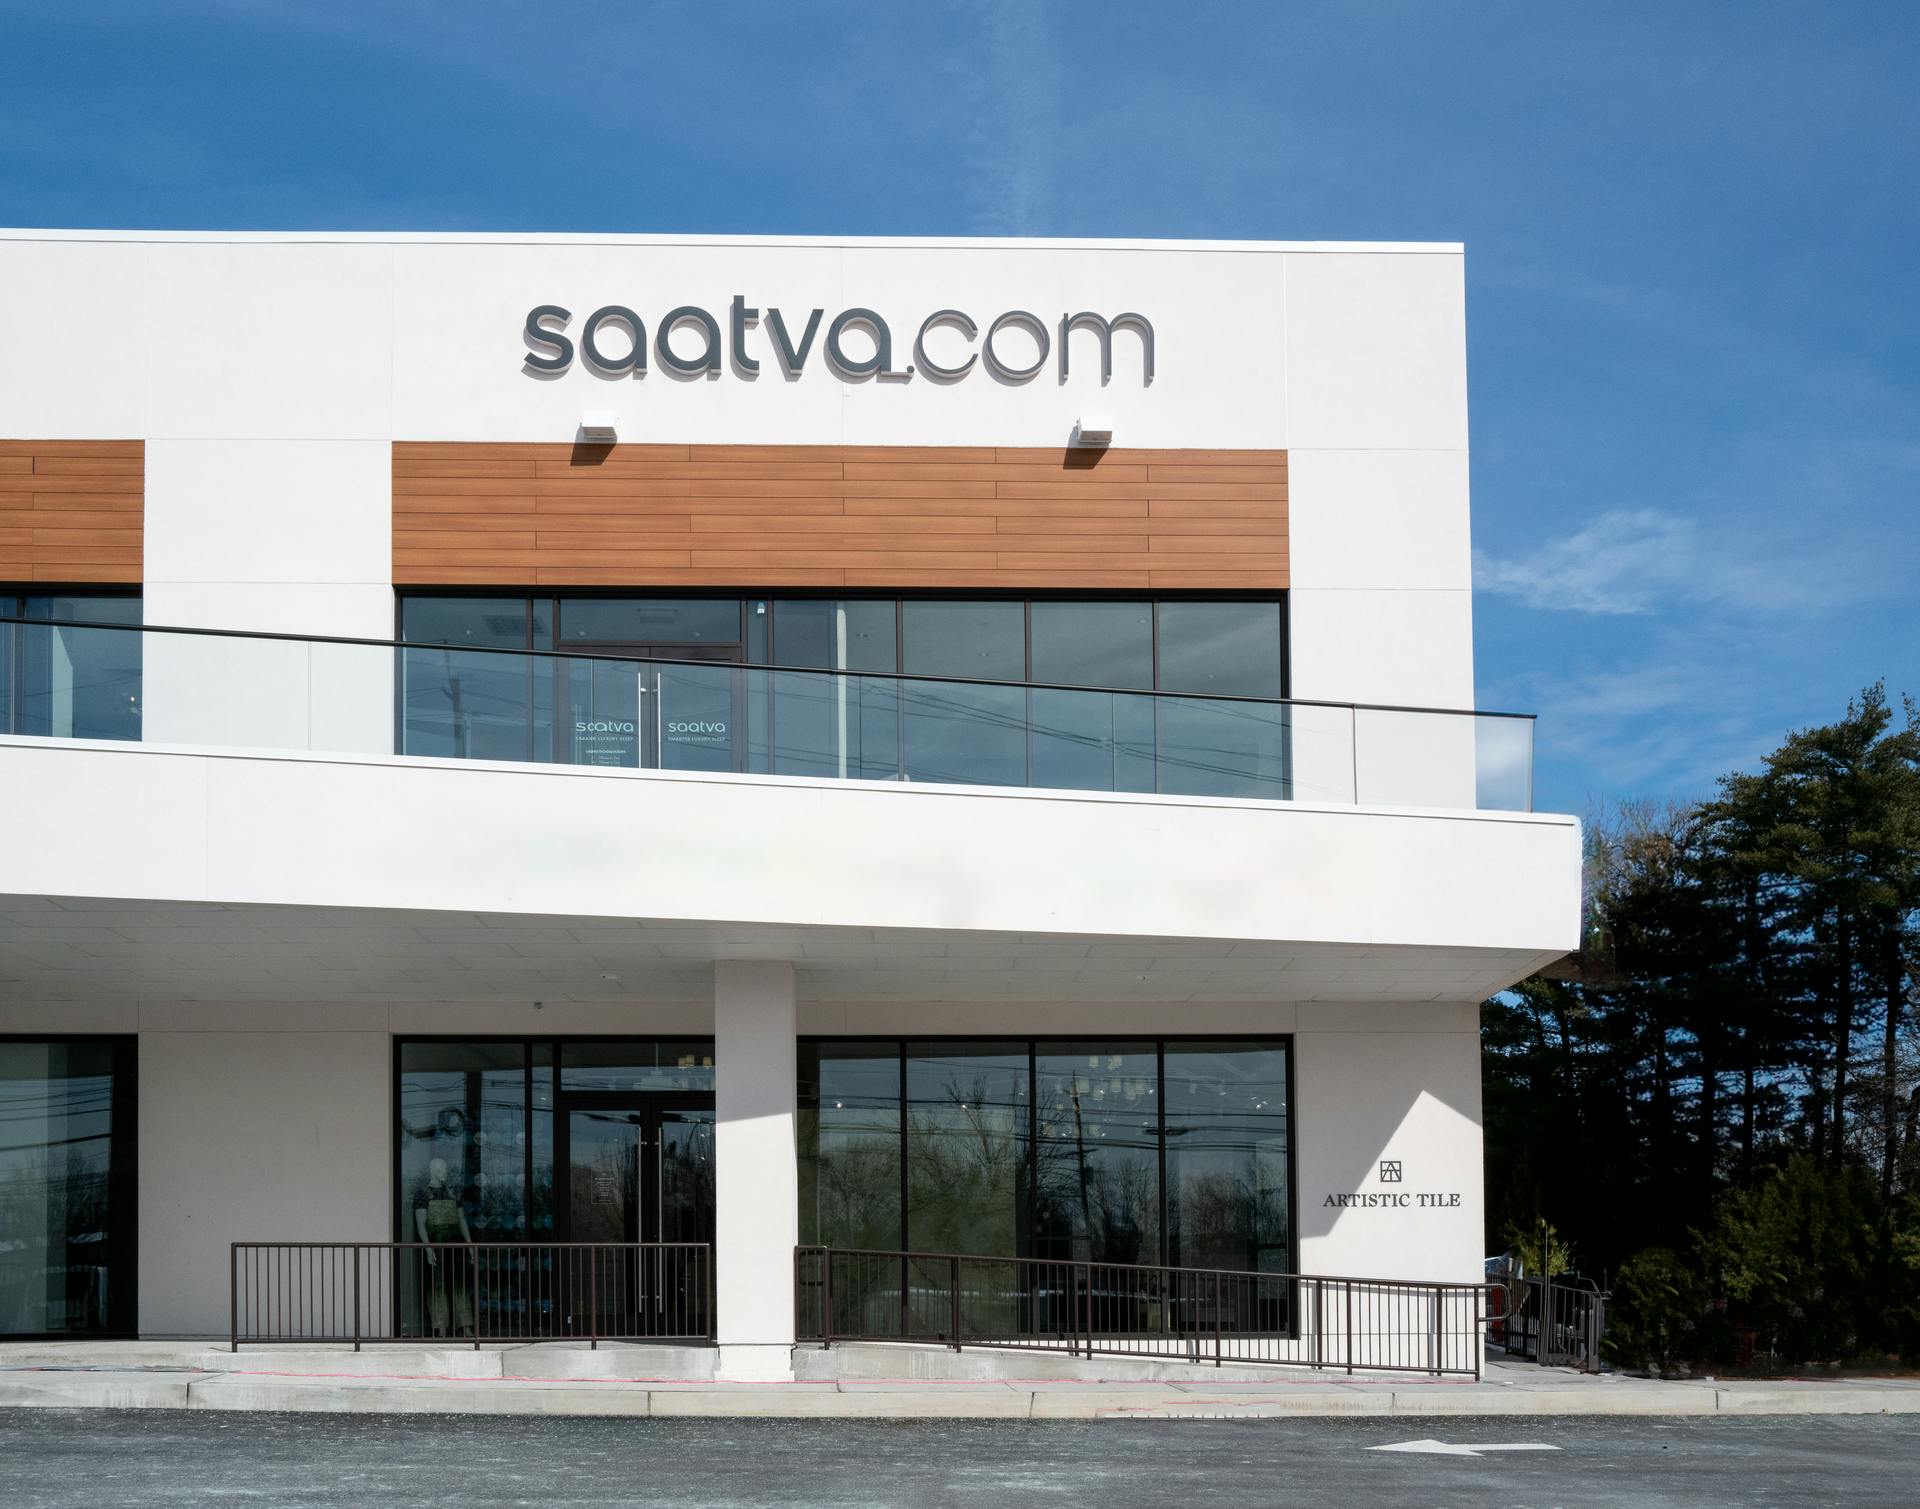 The stunning, bright exterior of the Saatva Paramus retail location and the complimentary curbside parking lot.